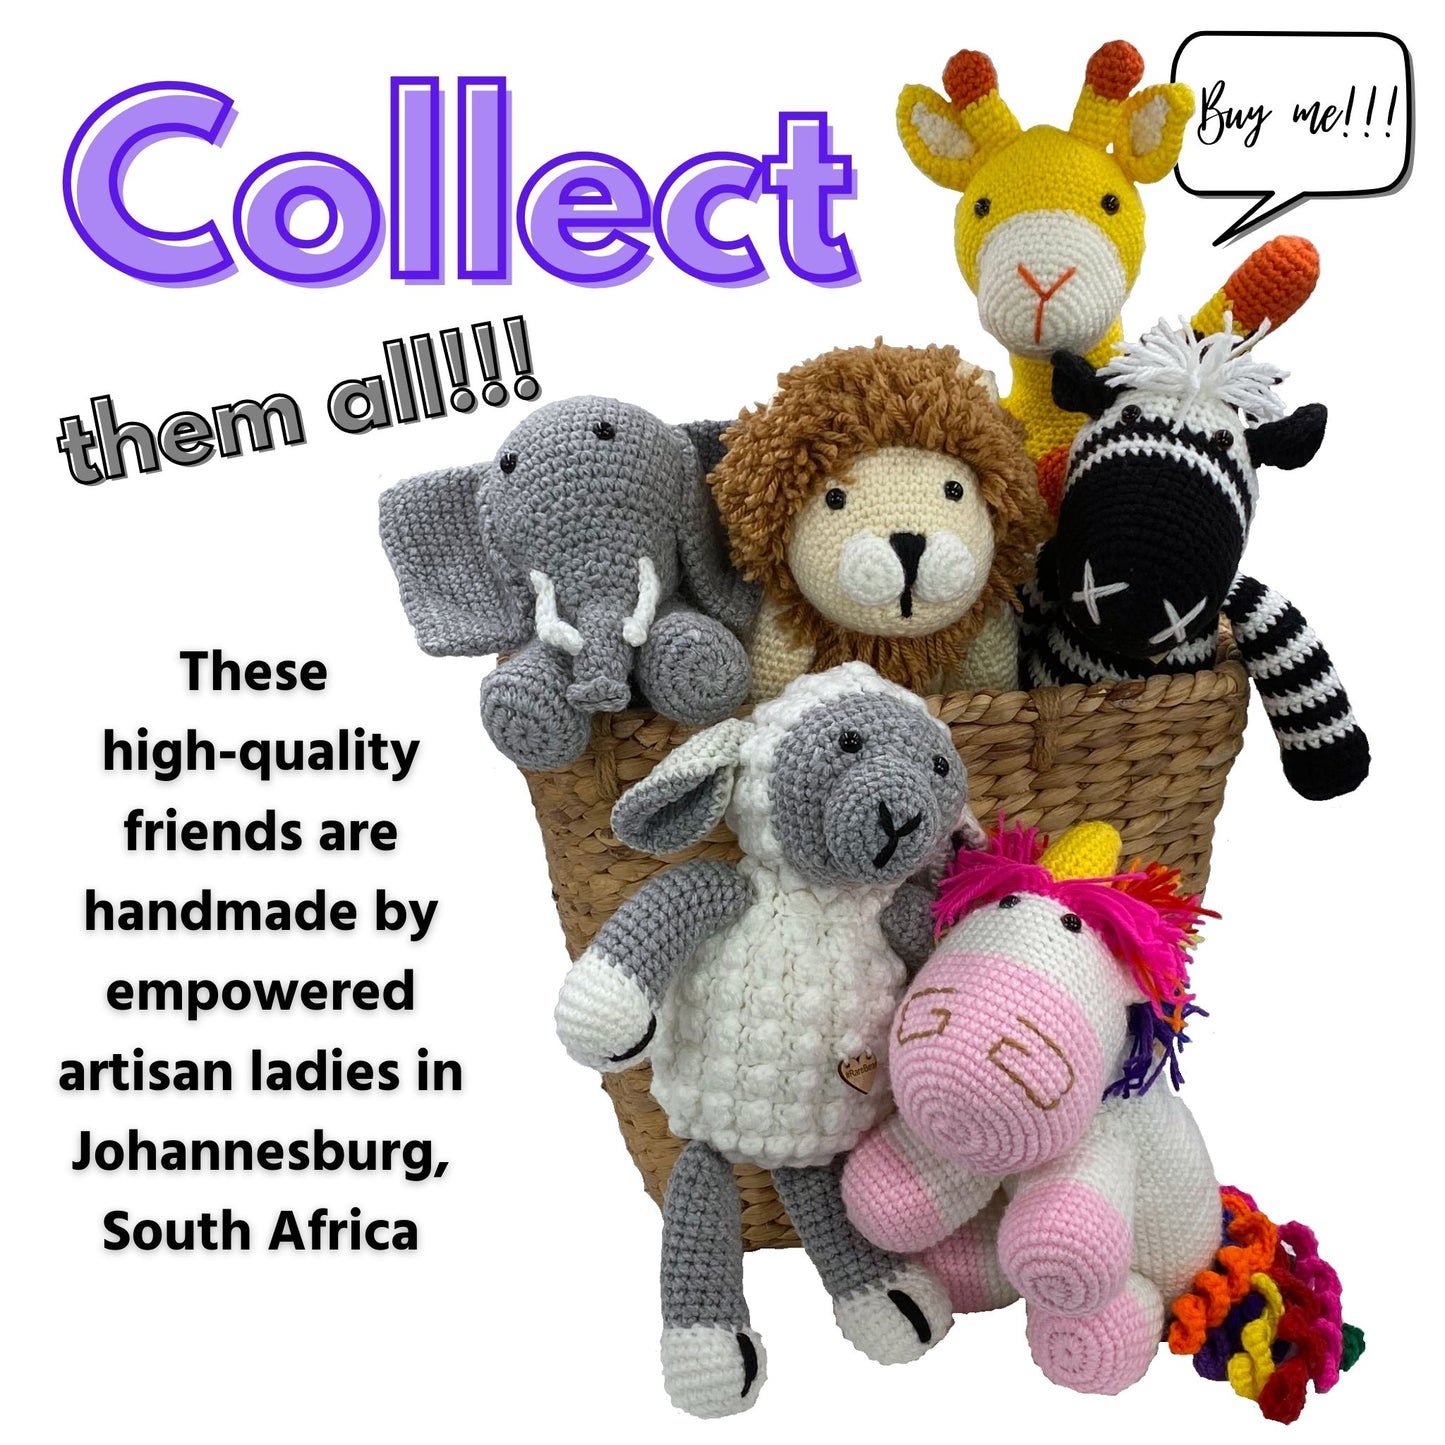 Giraffe - Handmade in South Africa by the ladies from Rare Bears Charity